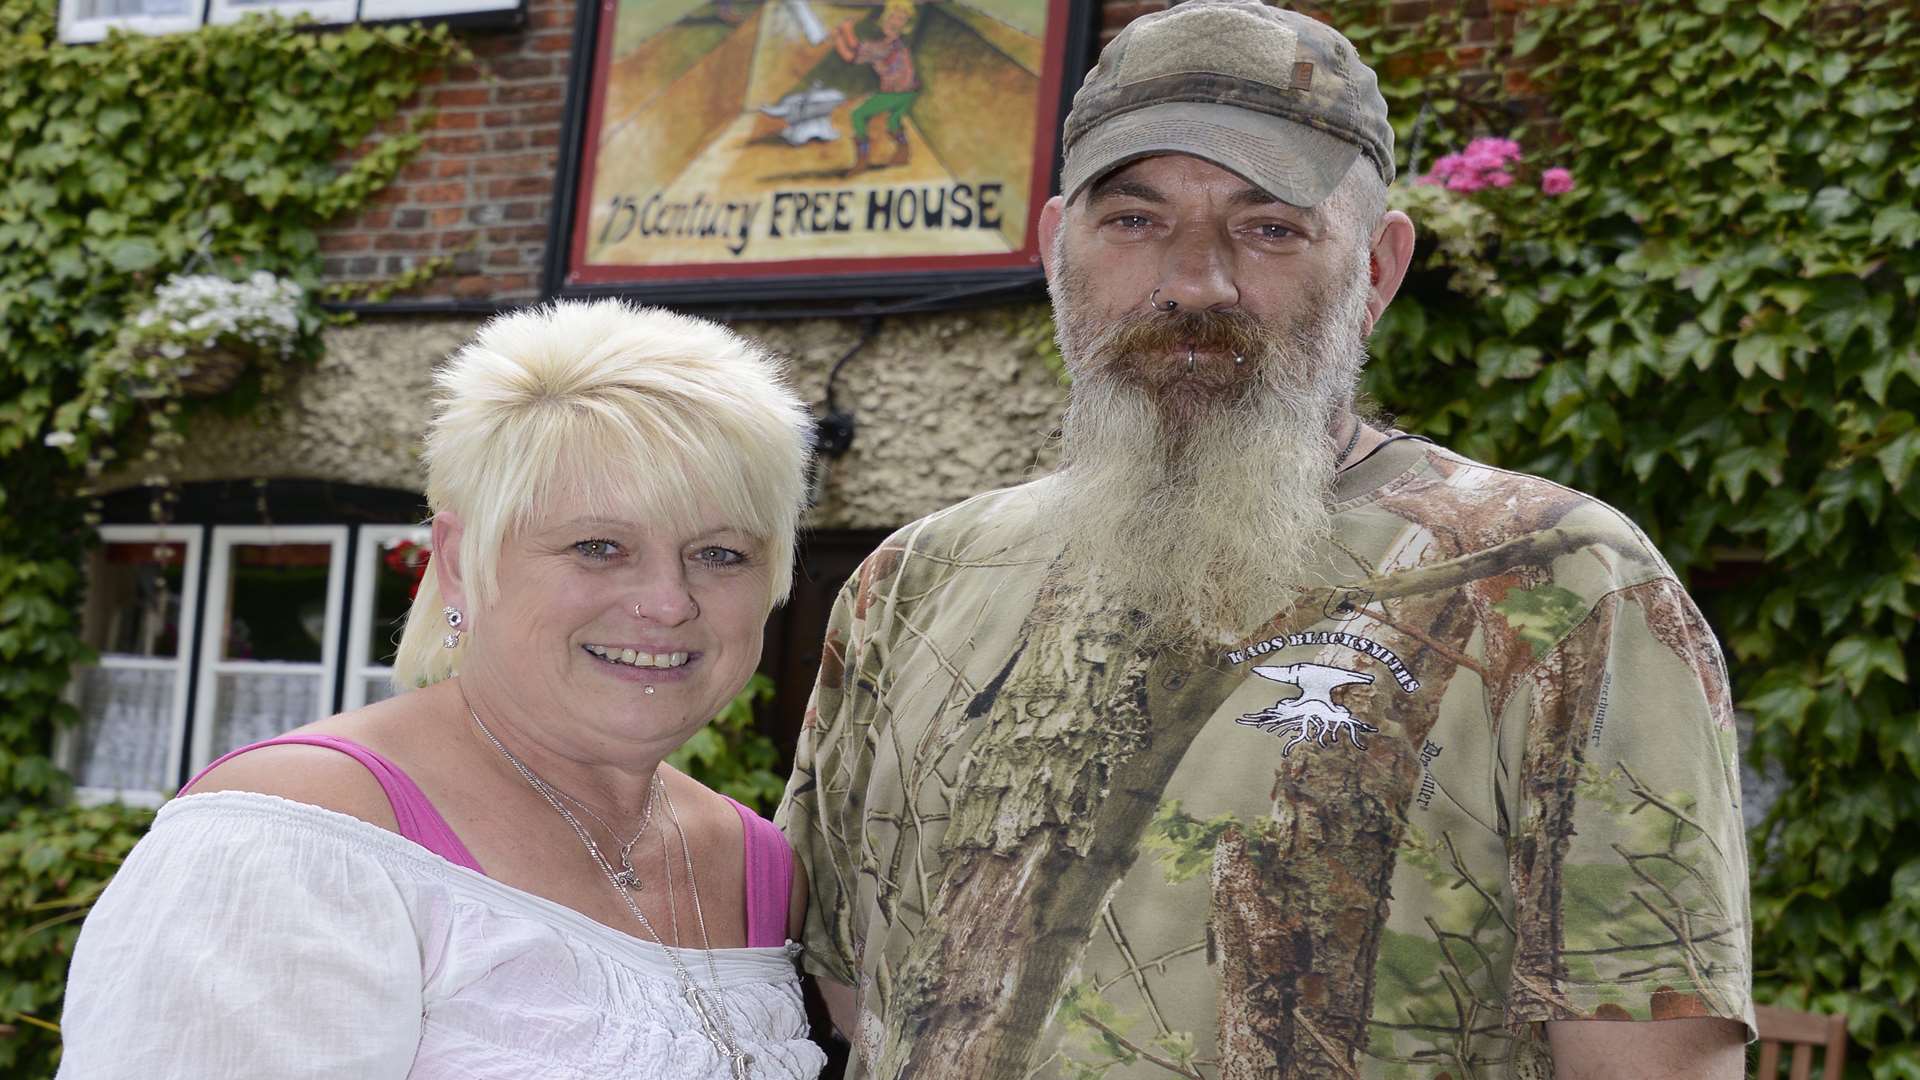 Bodsham Timber Batts pub new owners Sarah and Ross Berry